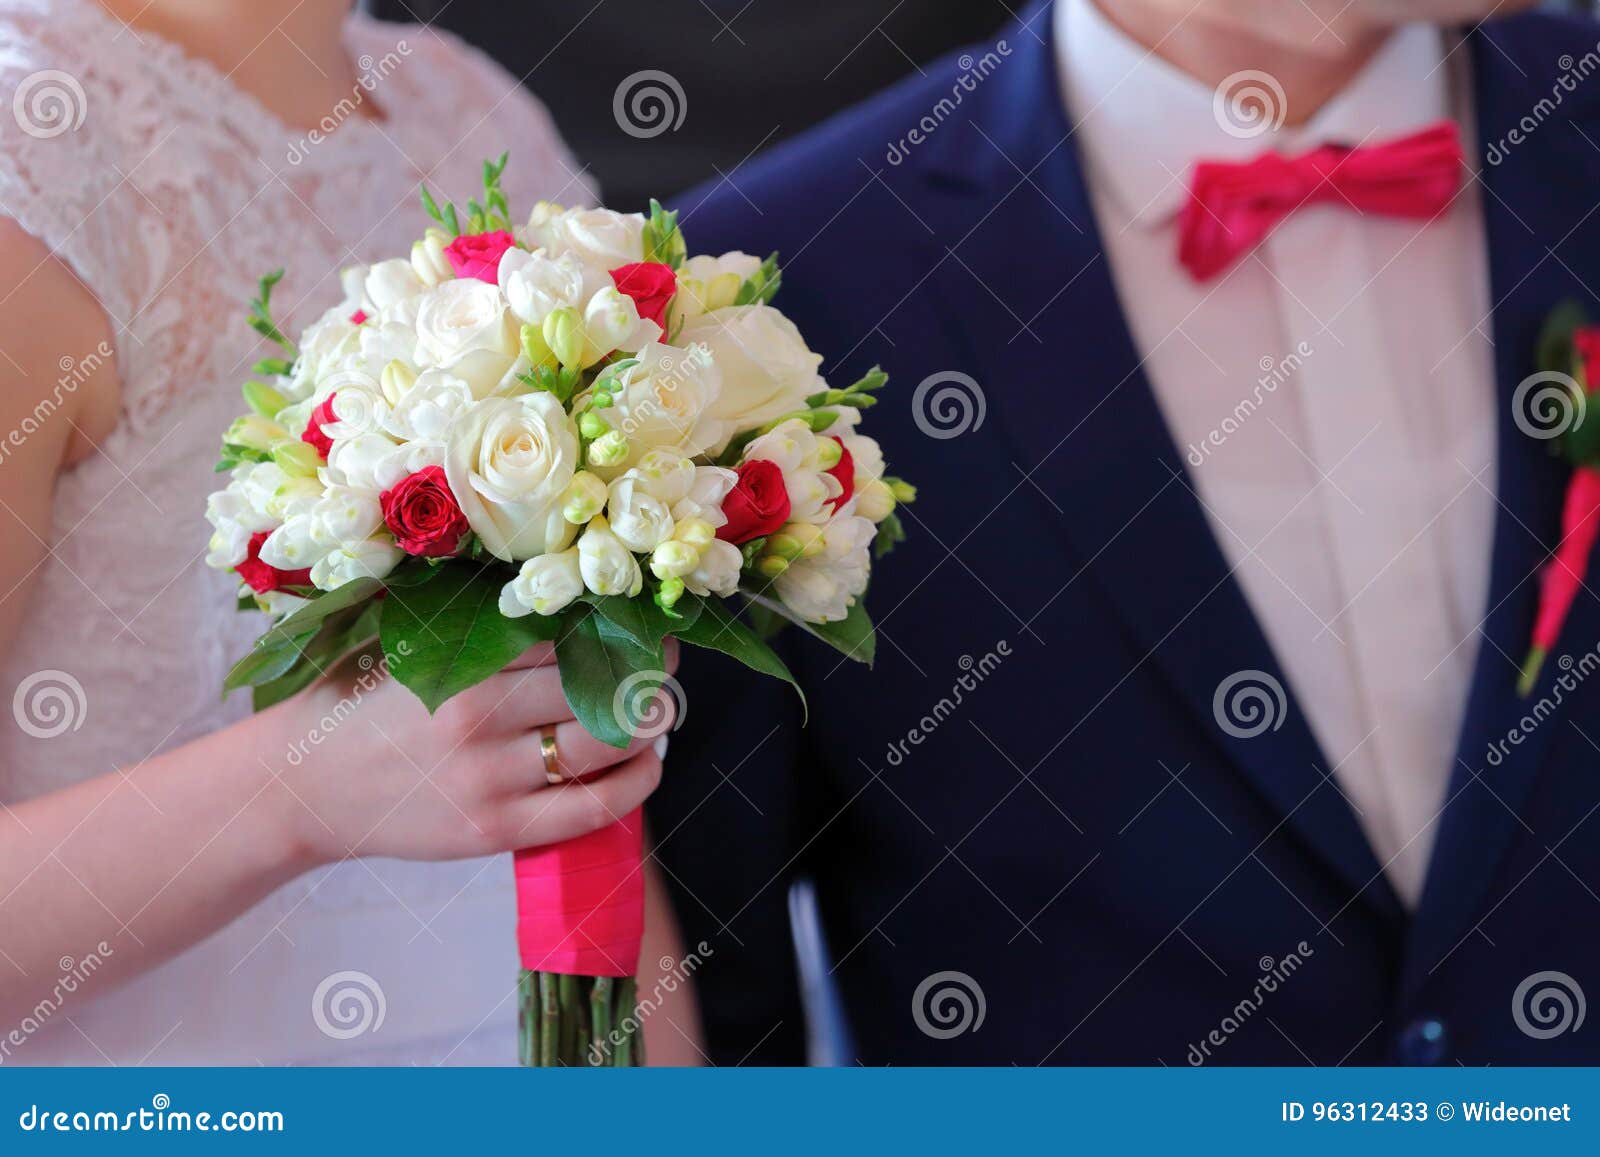 Bride Holding Colorful Flowers Bouquet with Her Hands on Wedding Stock ...